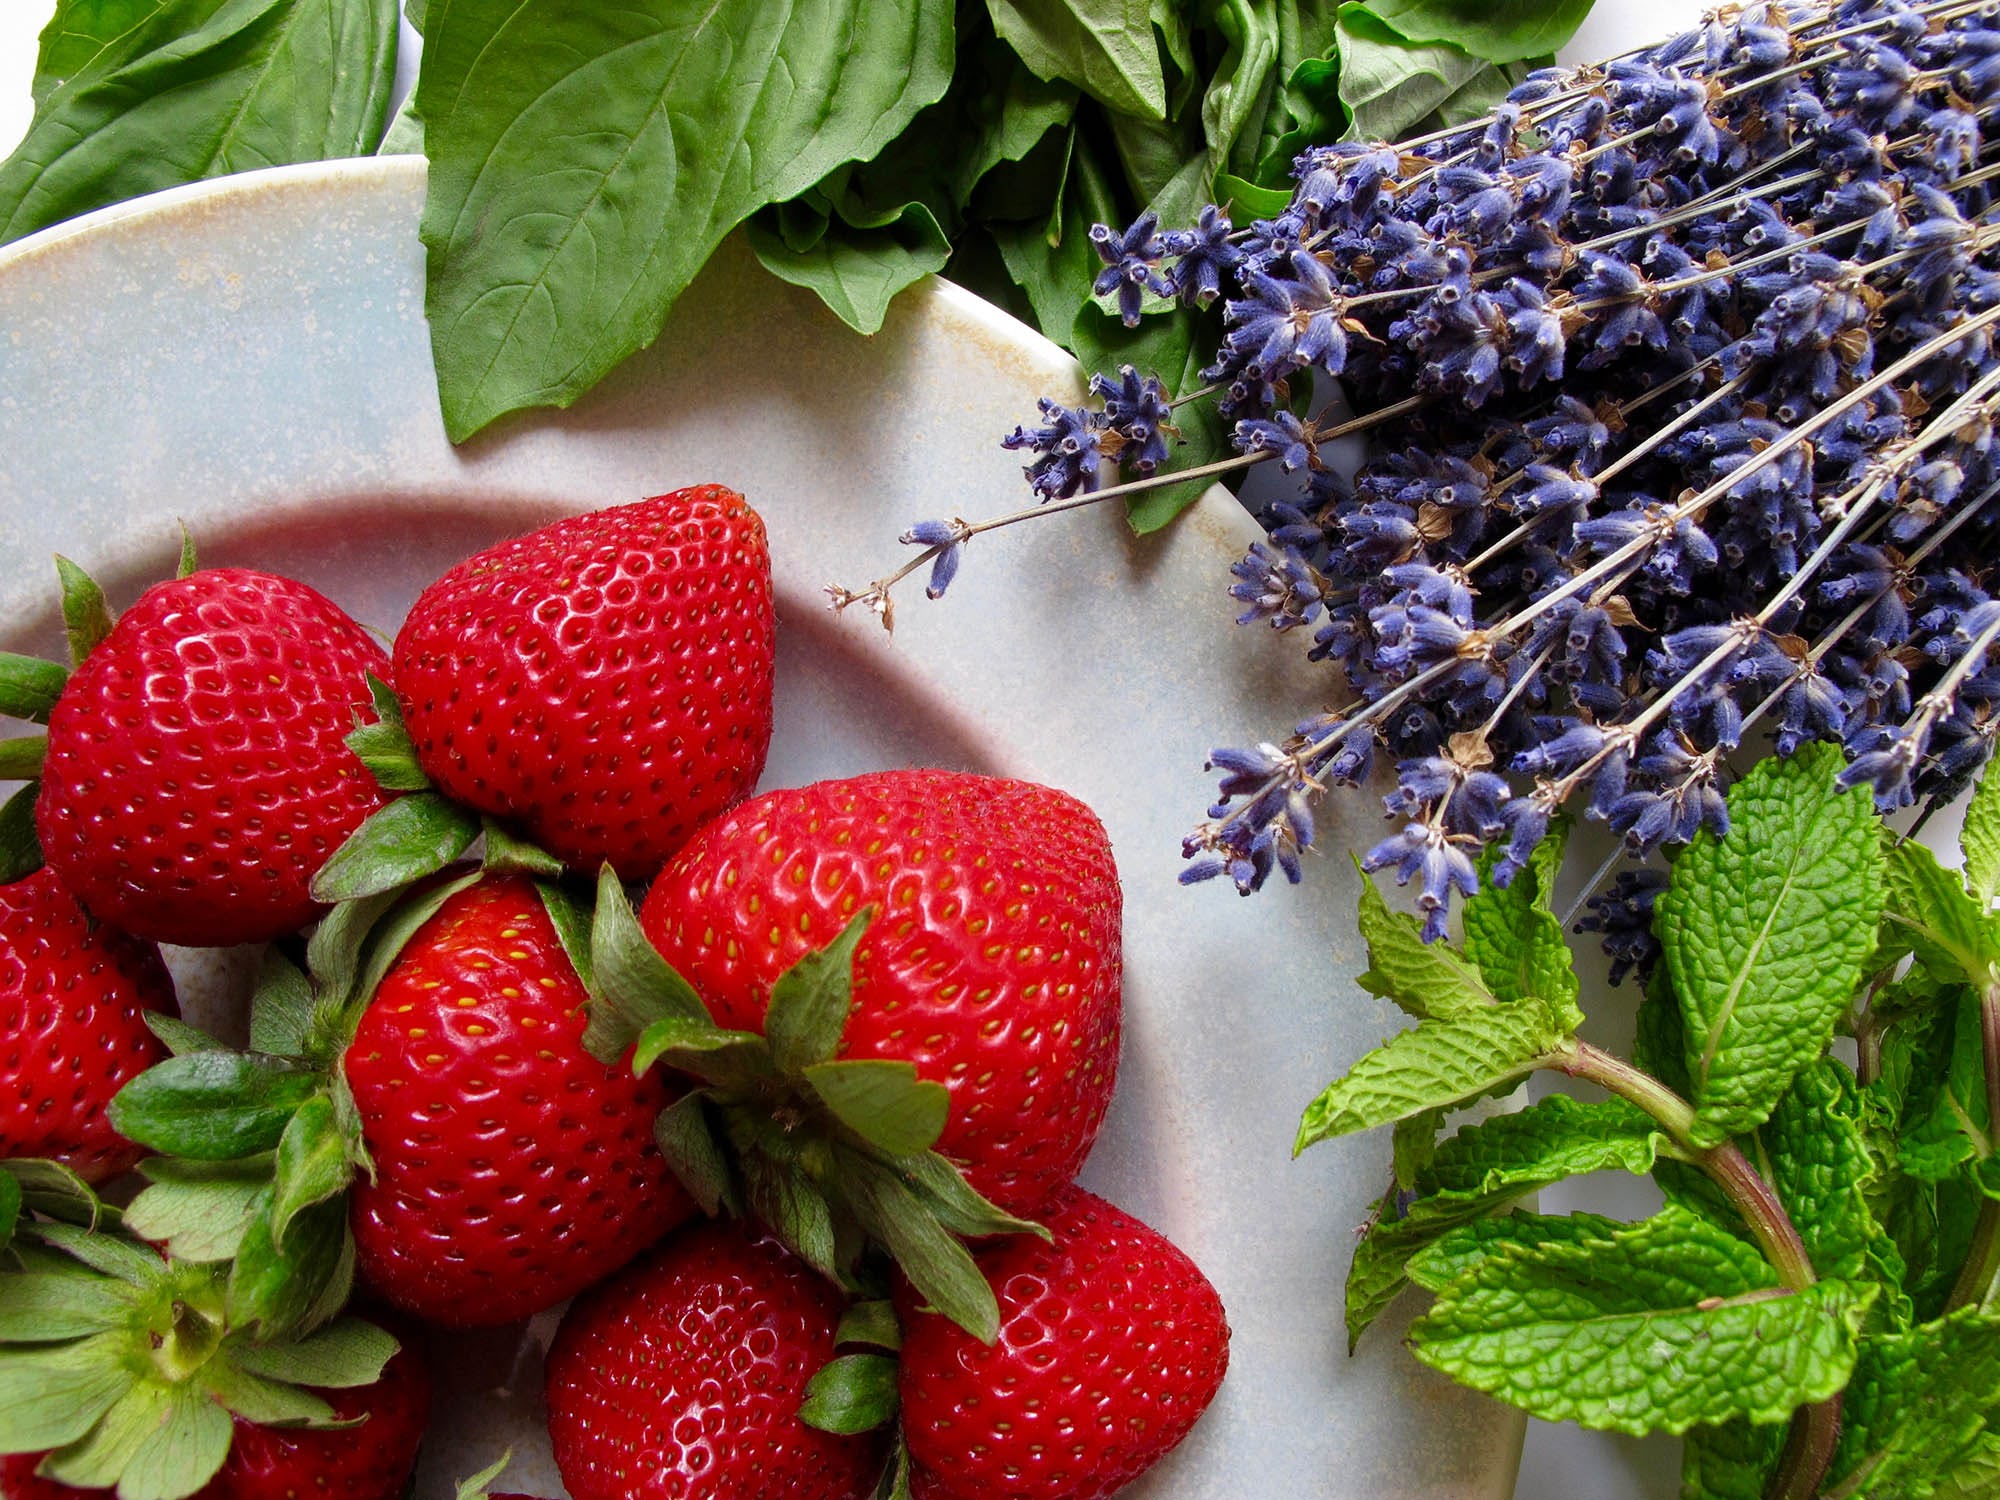 Berries & Herb = A Journey to Discovering New Favorite Pies and Jams